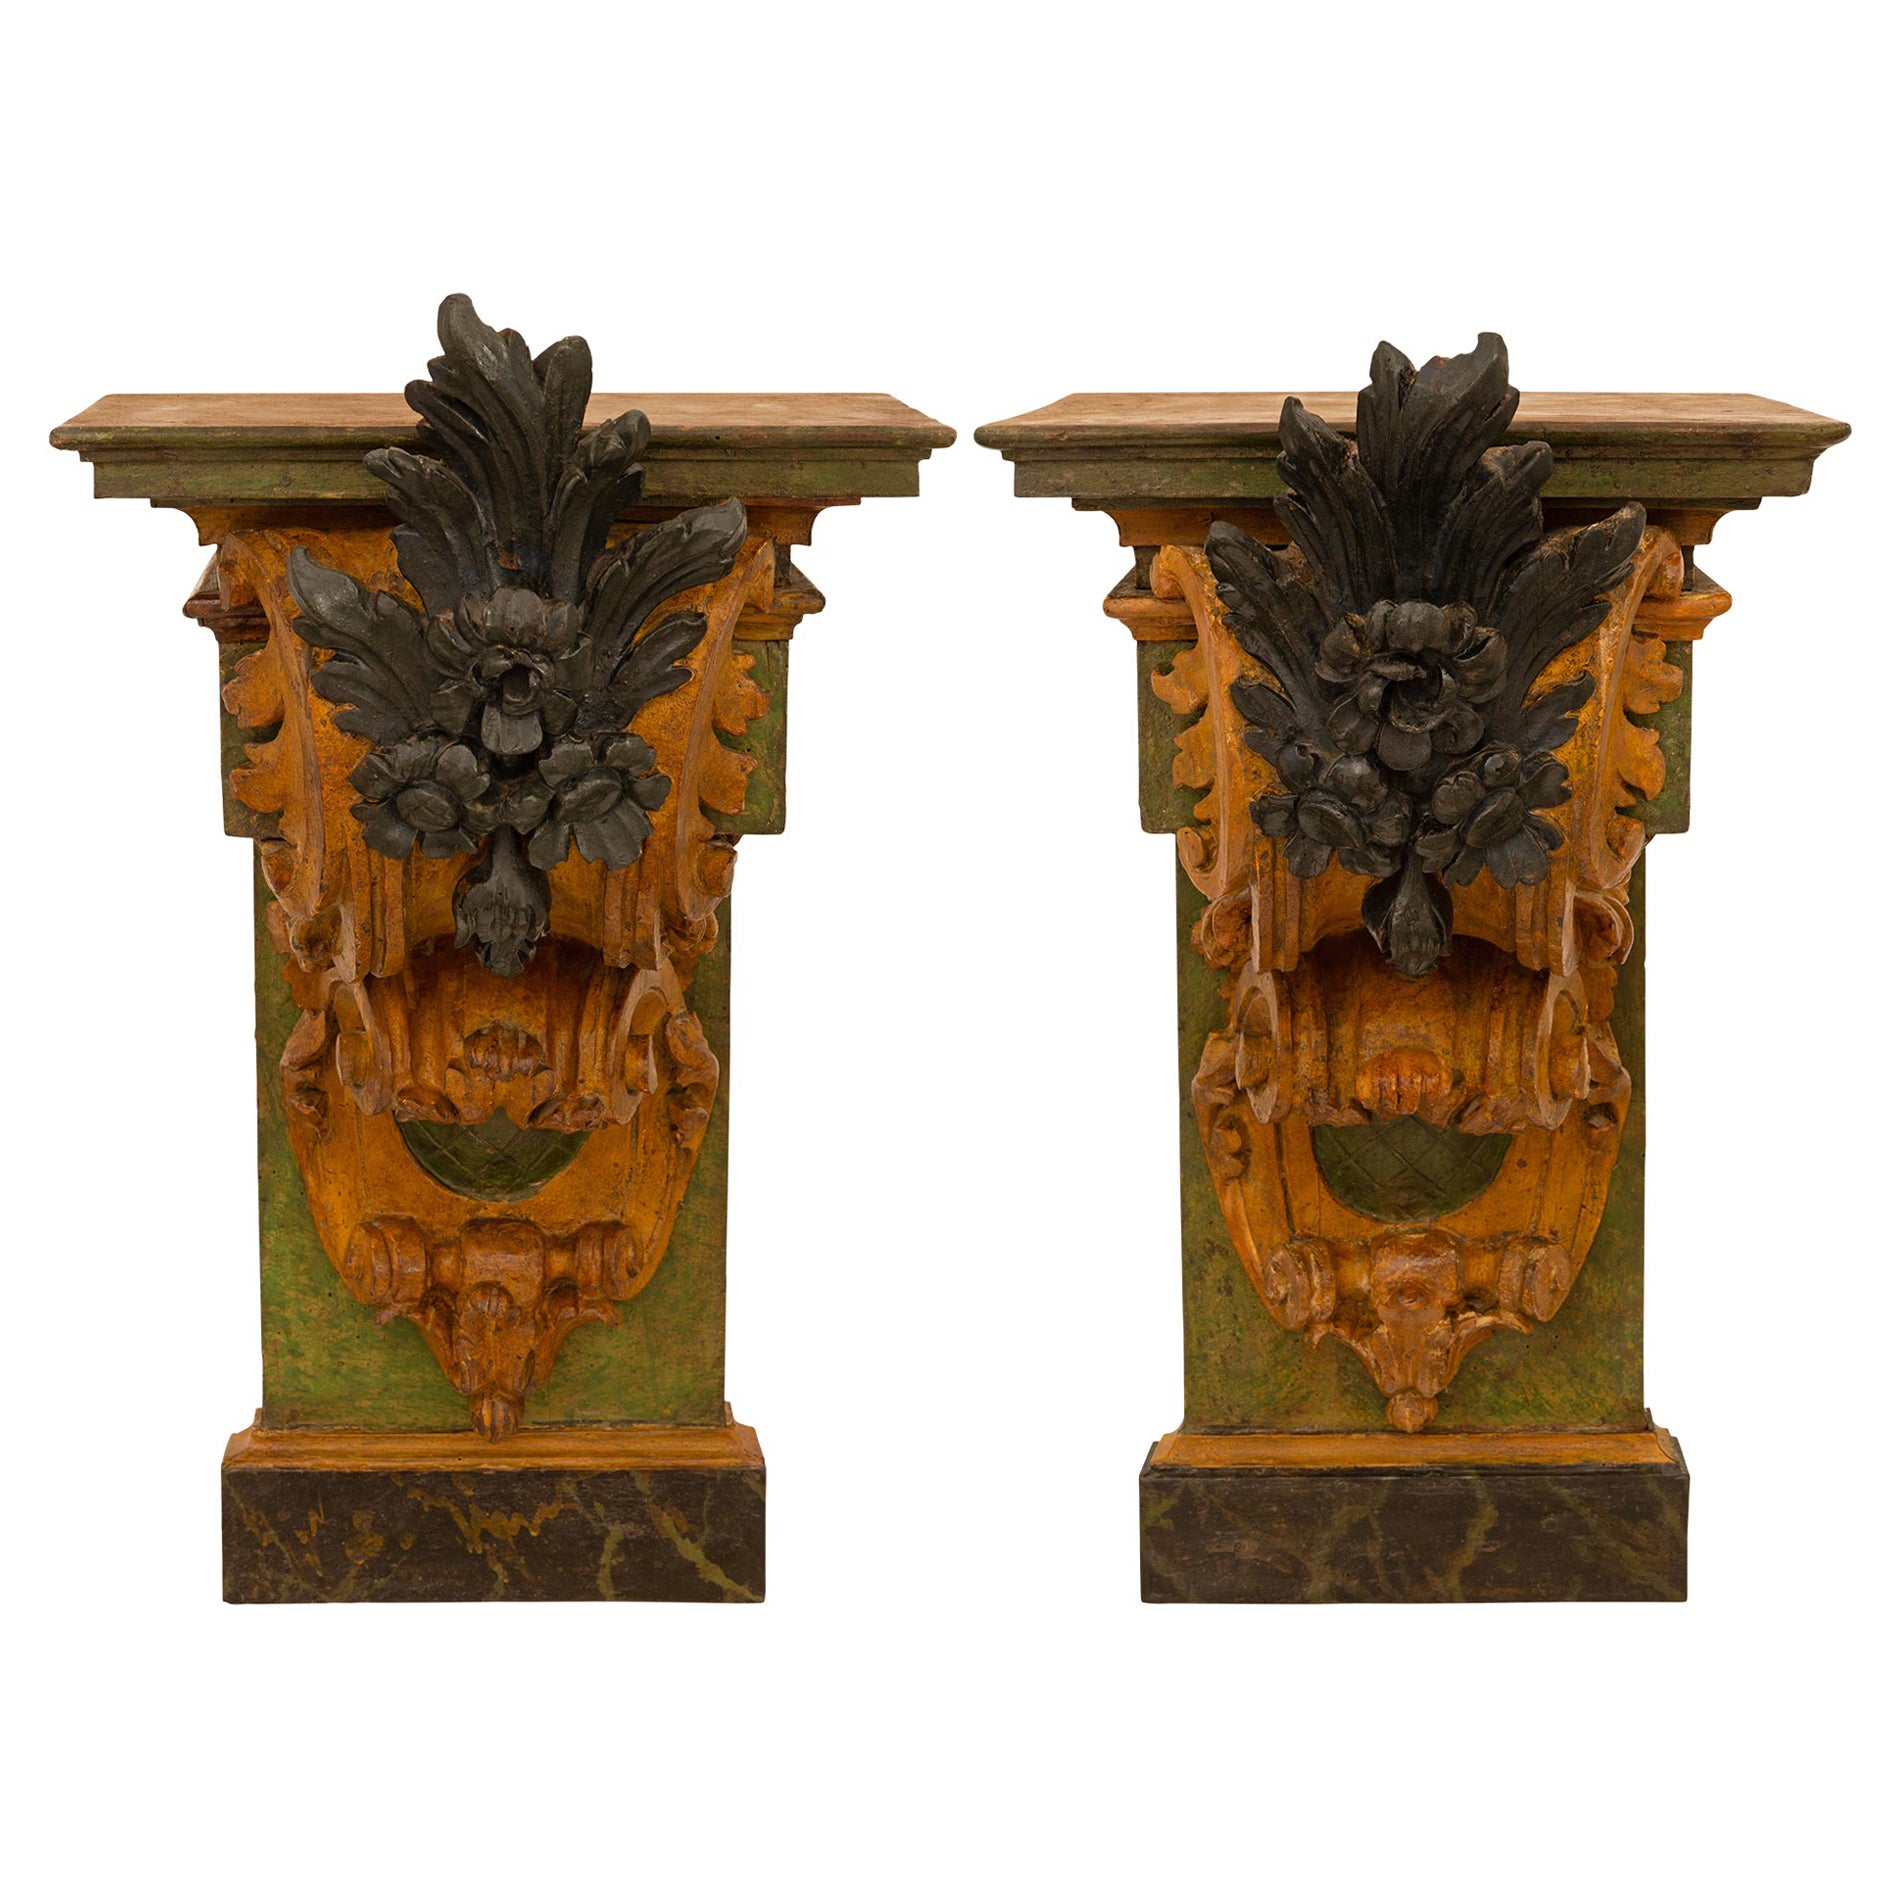 Pair Of Italian 18th Century Baroque St. Patinated Wood &Giltwood Wall Brackets